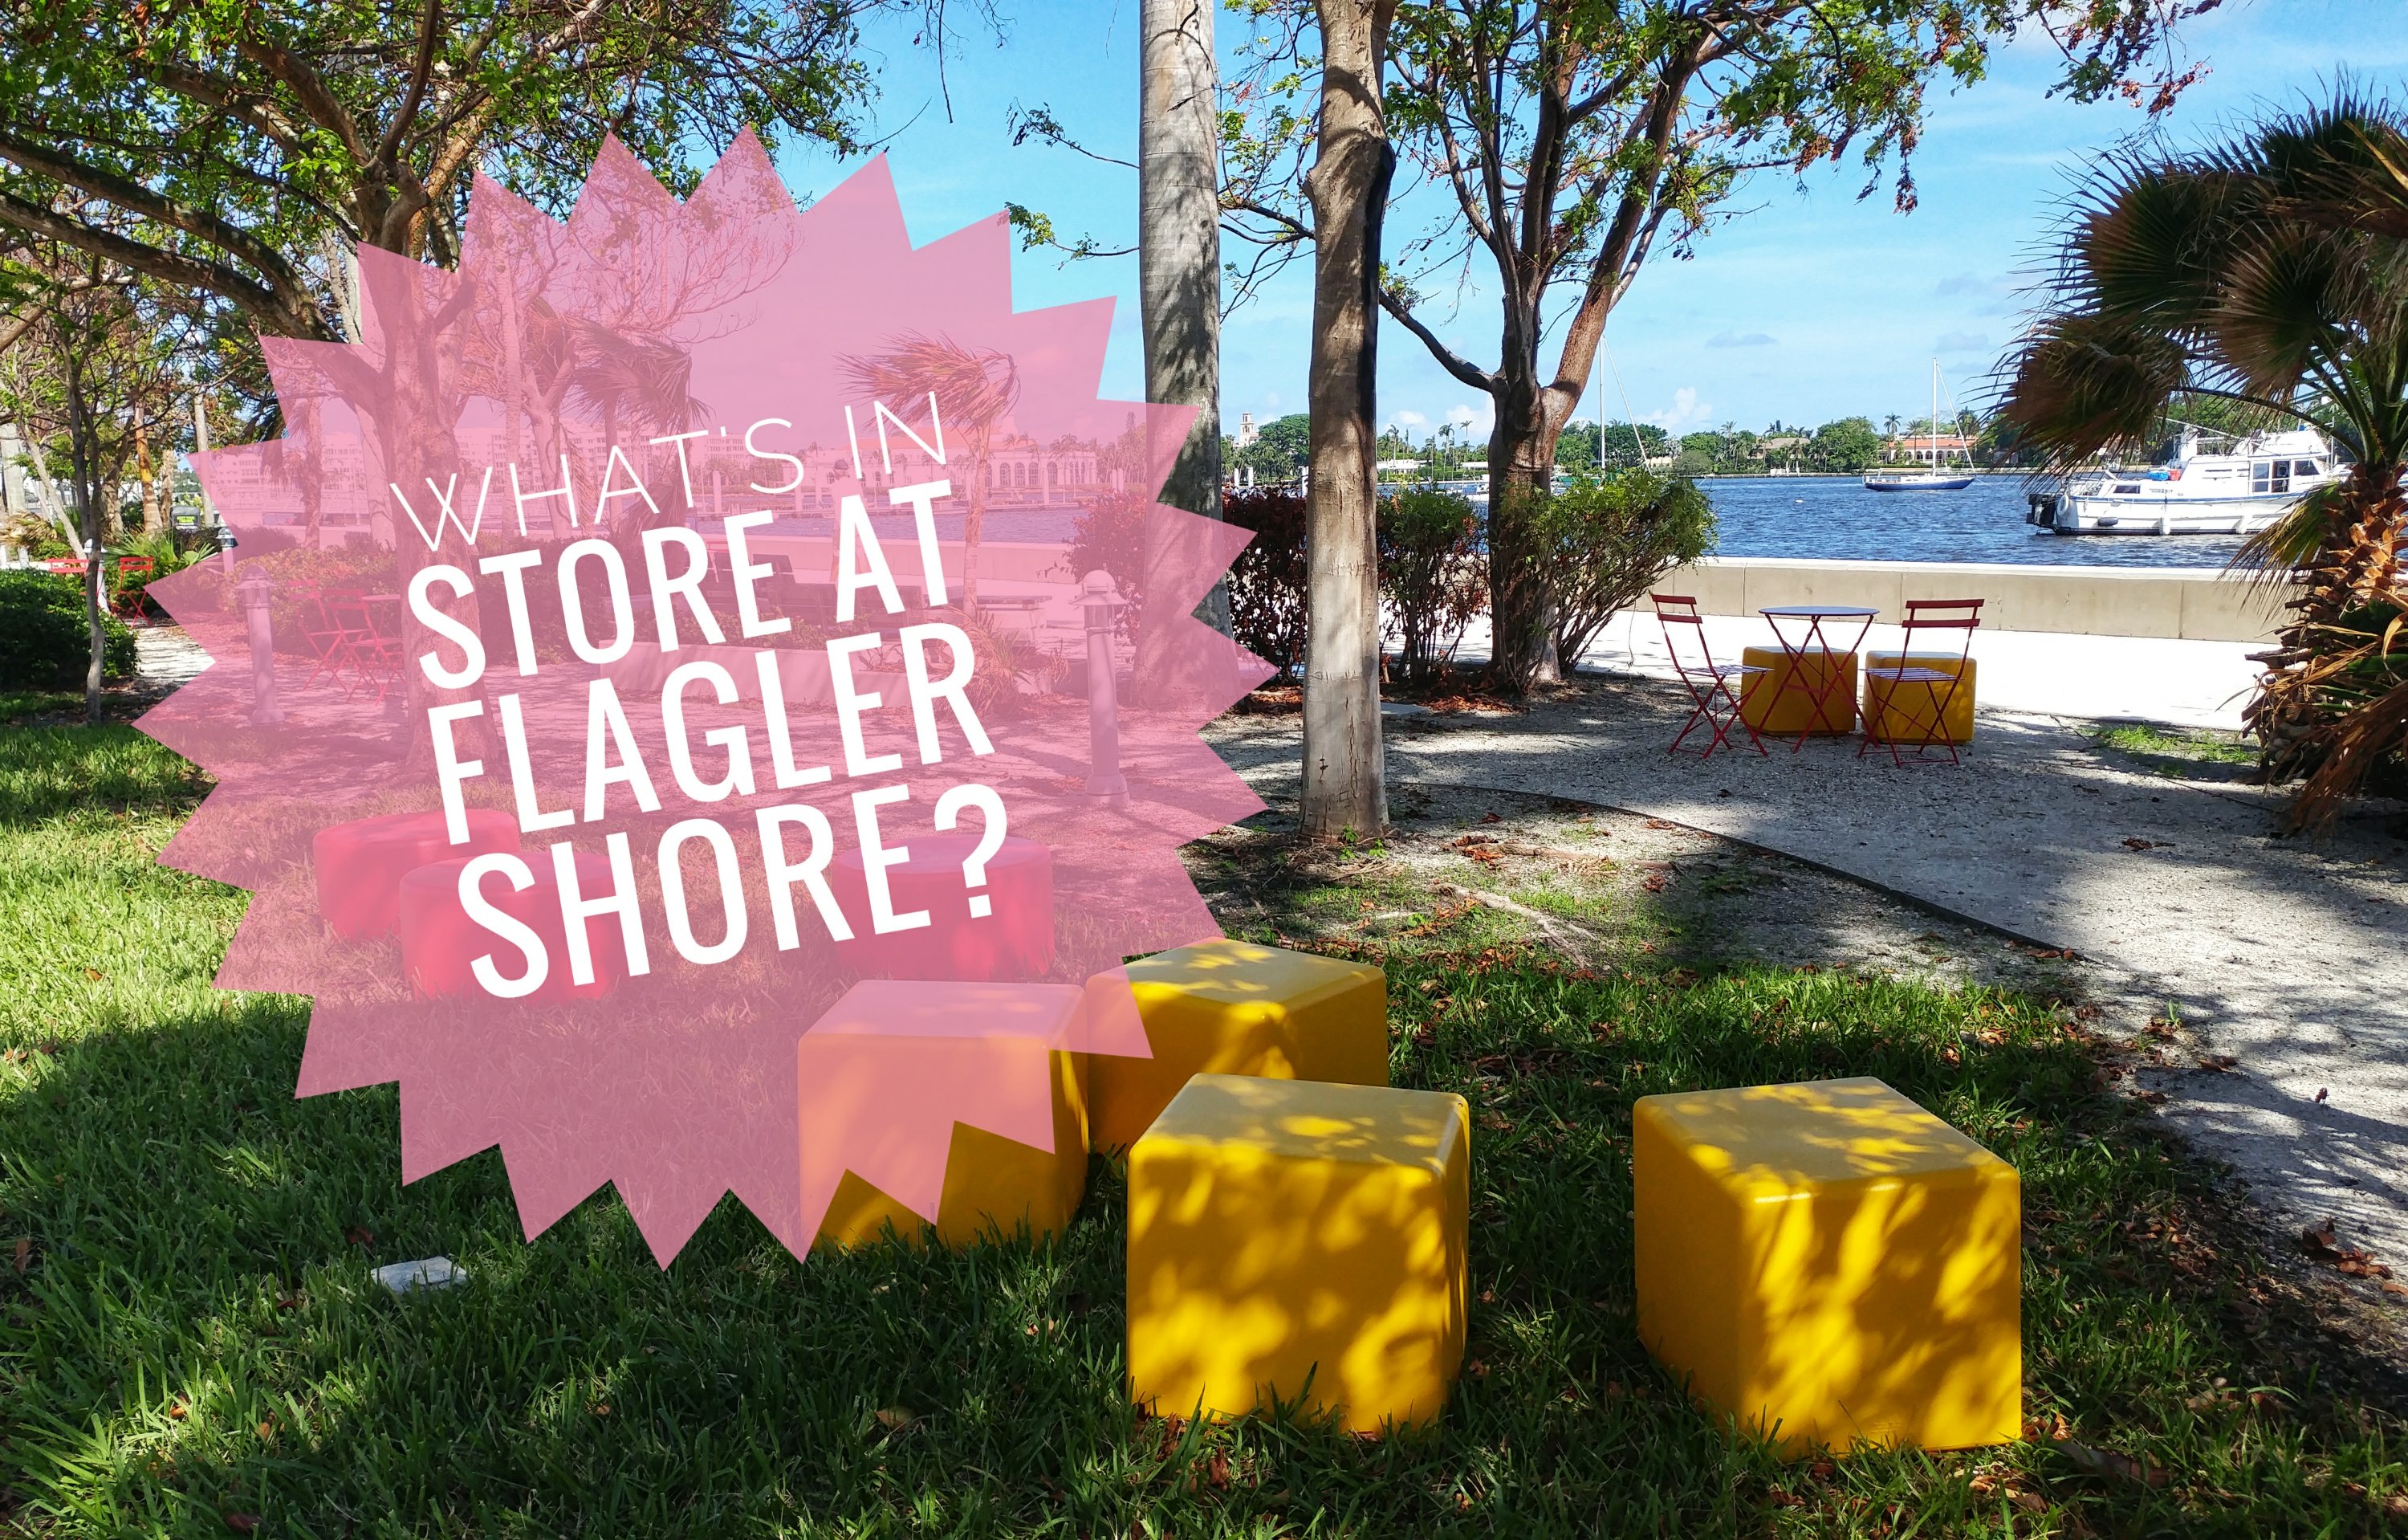 What’s in Store at Flagler Shore?